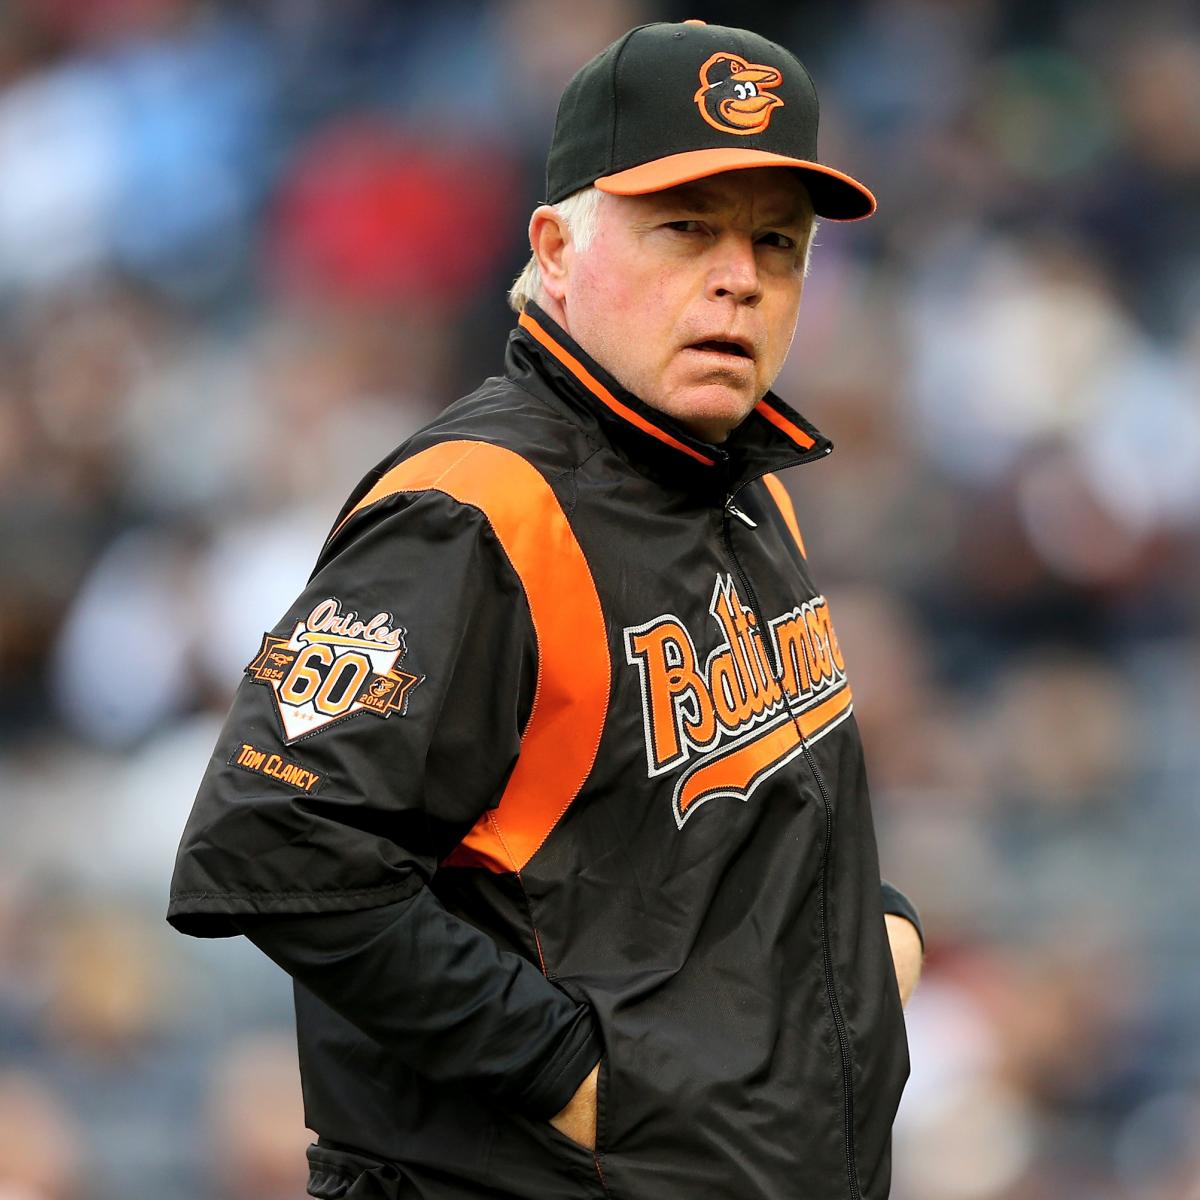 Buck Showalter Wins AL Manager of the Year Award Voting Results